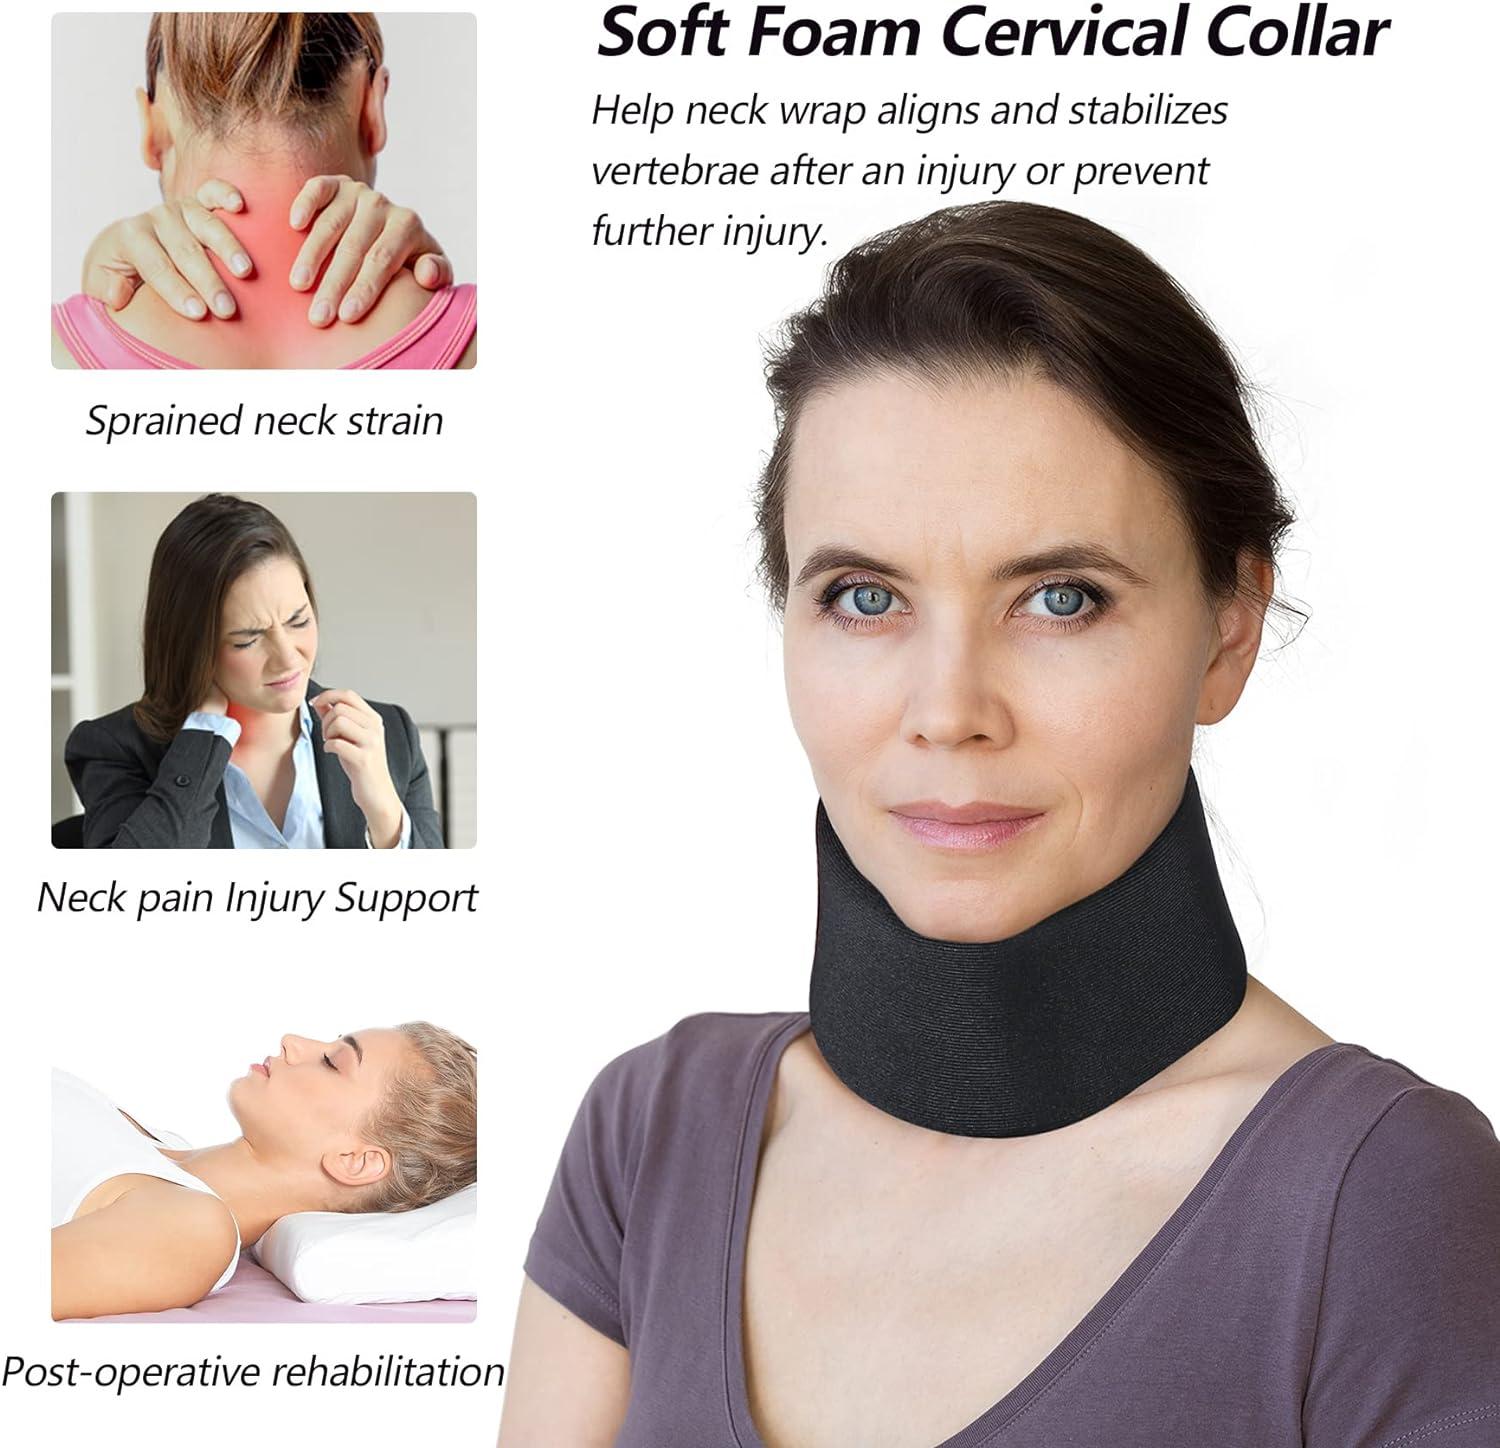 Neck Brace For Neck Pain Relief, Neck Support, Cervical Collar For Sleeping,  Neck Support Relieves Pain Pressure In Spine